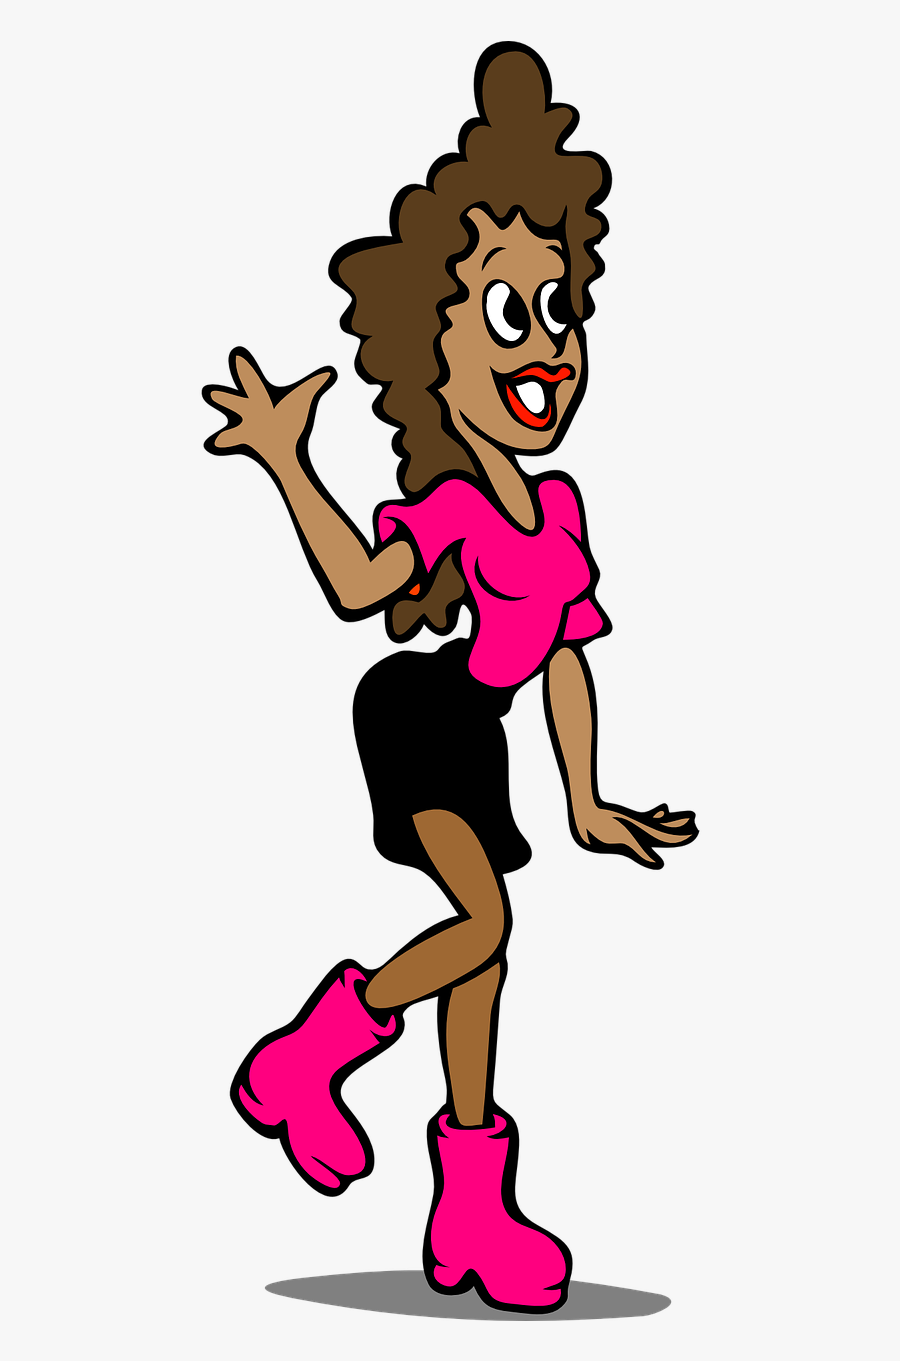 Person Waving Hi Animated, free clipart download, png, clipart , clip art.....